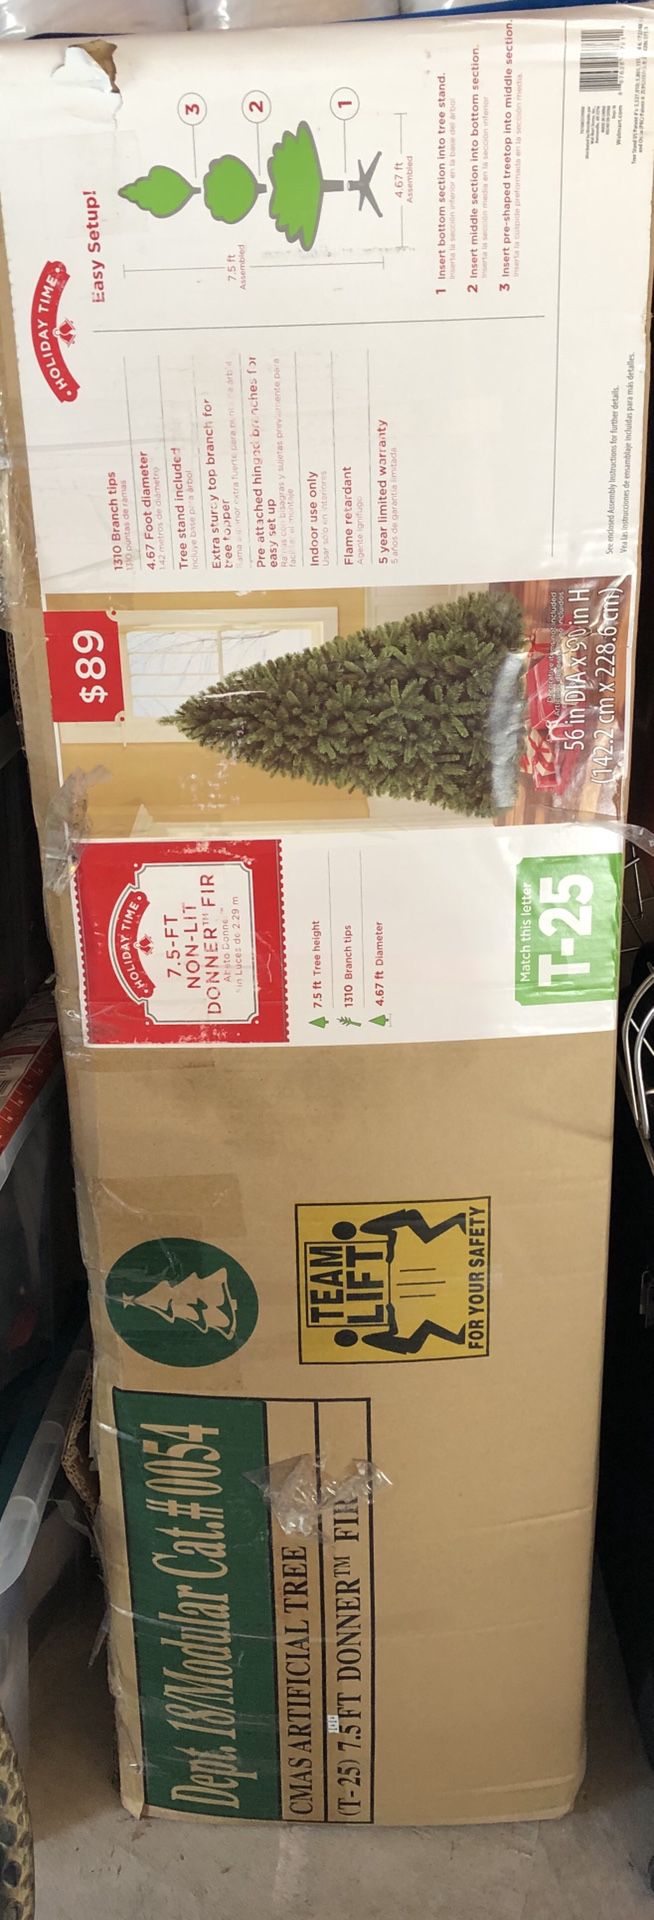 7 ft artificial Christmas tree